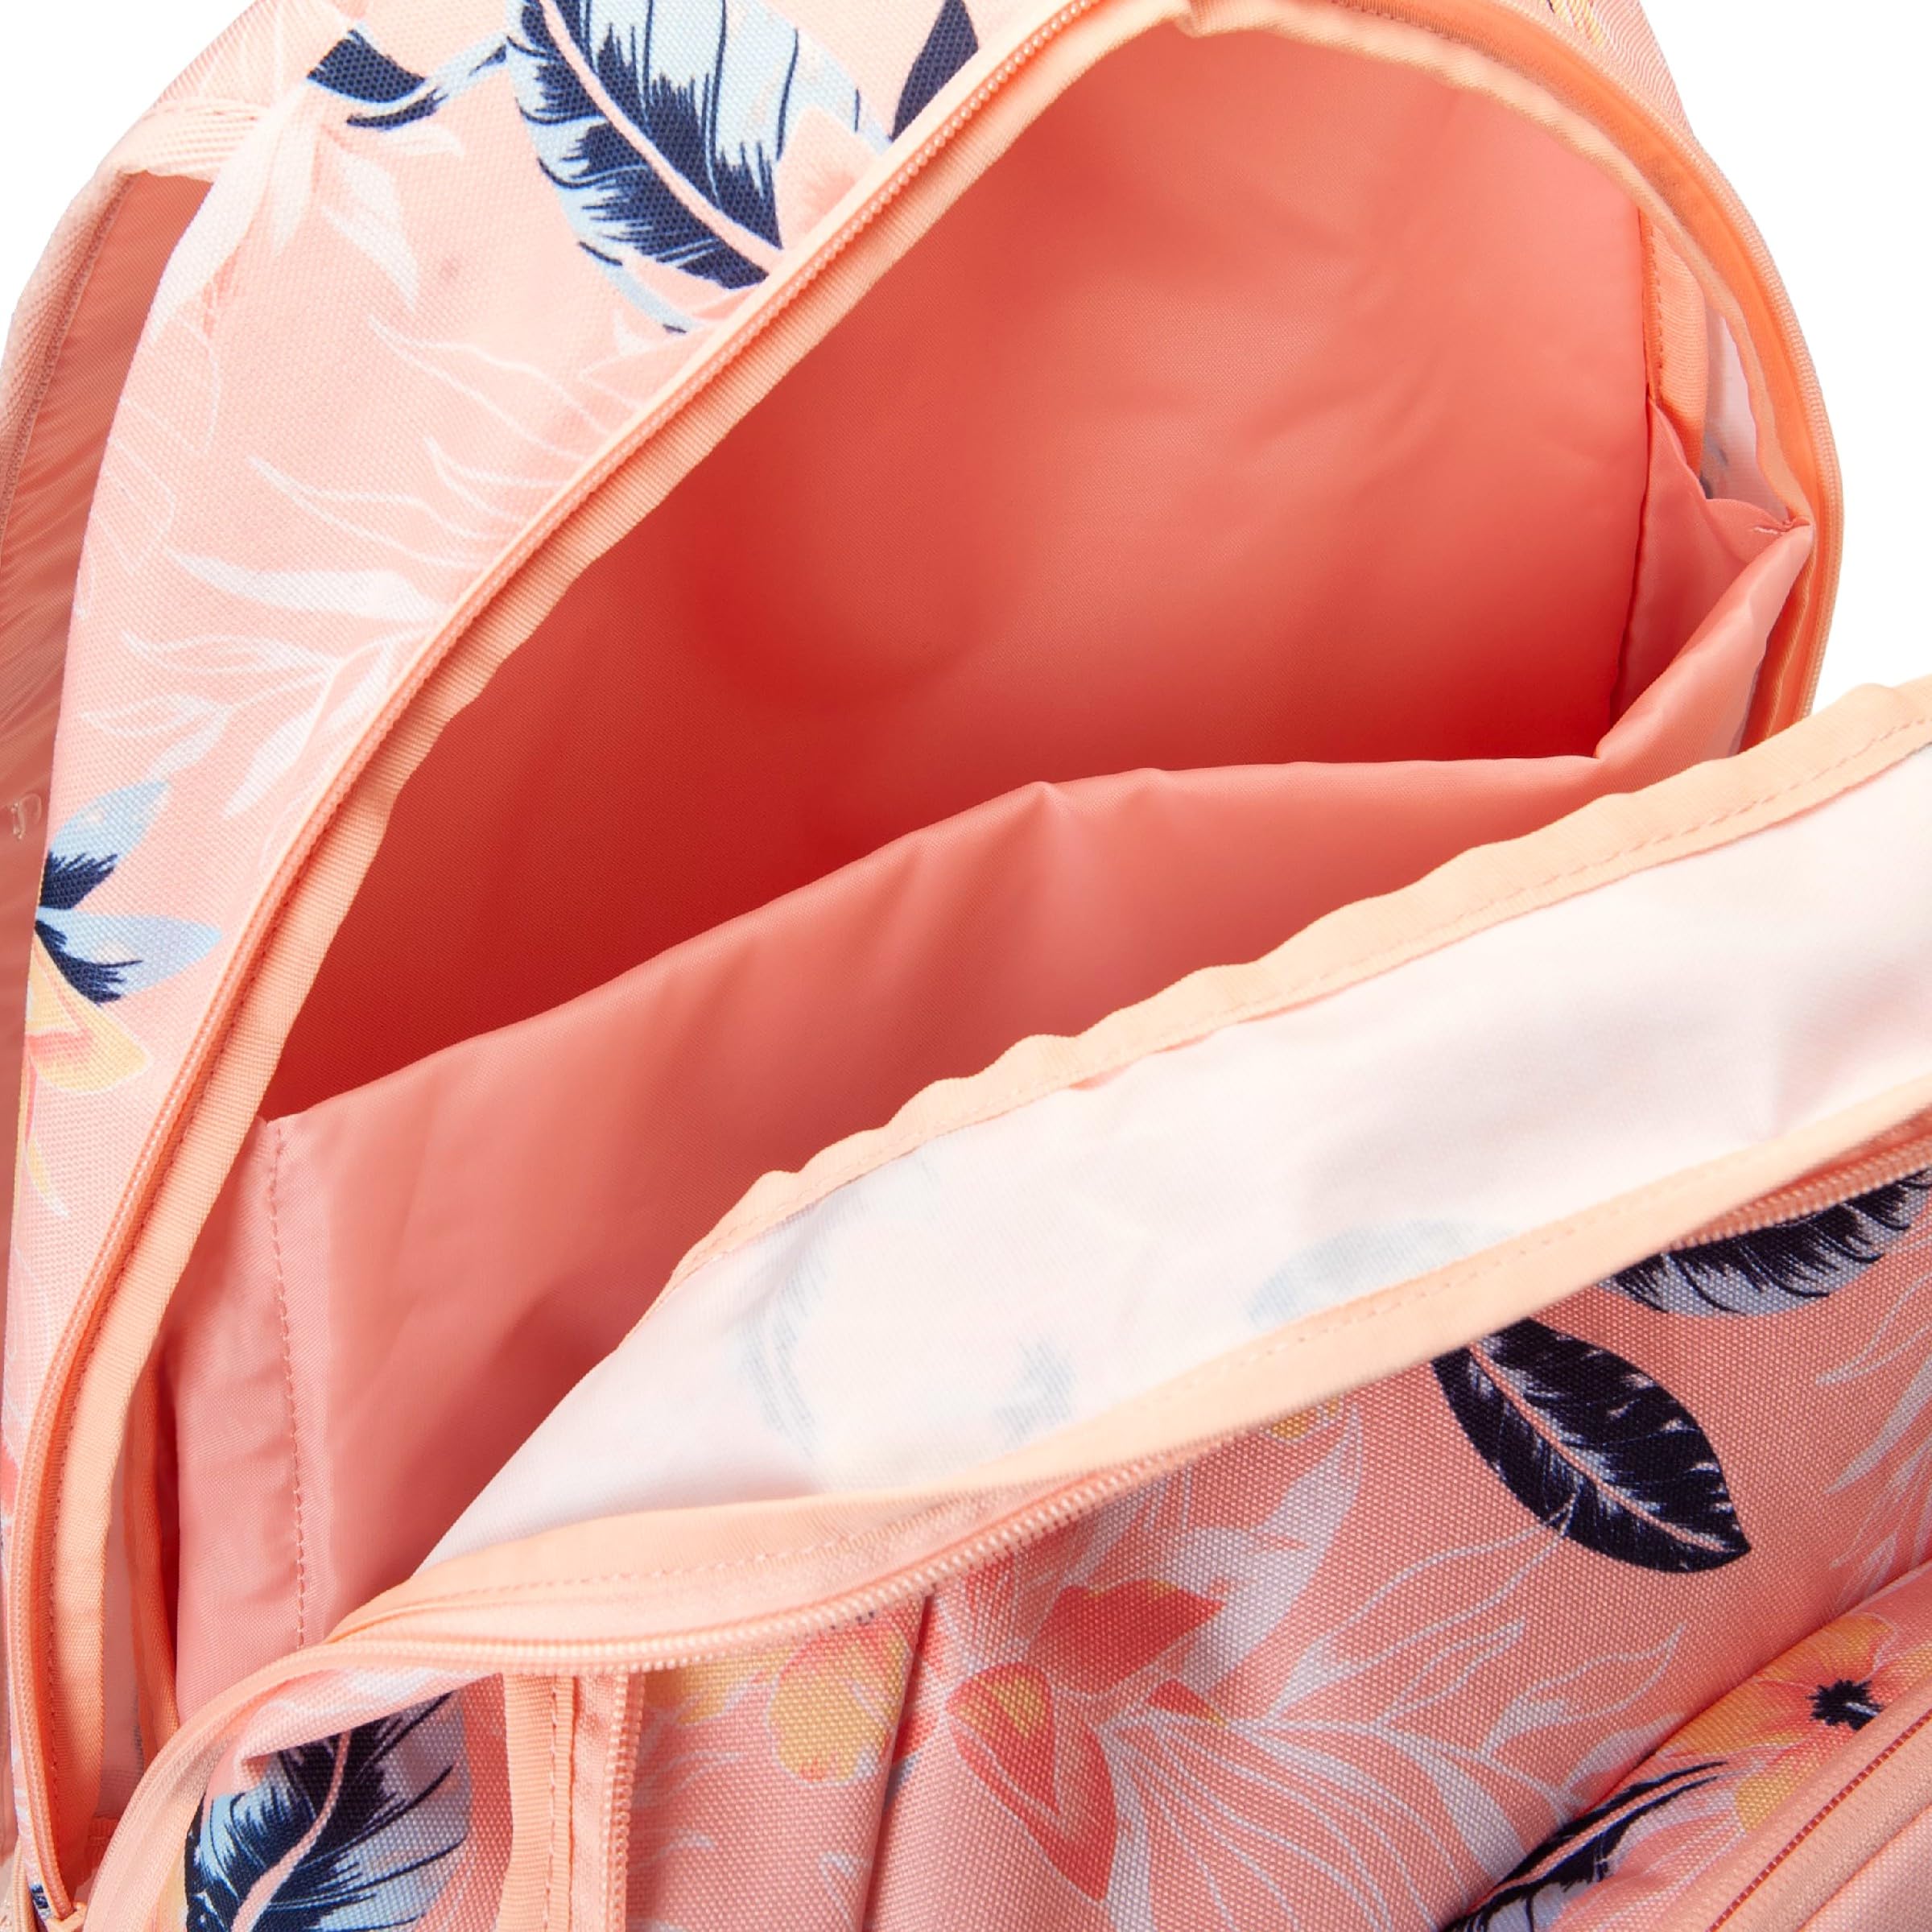 Roxy Women's Shadow Swell 24 L Medium Backpack, Tropical Peach, One Size